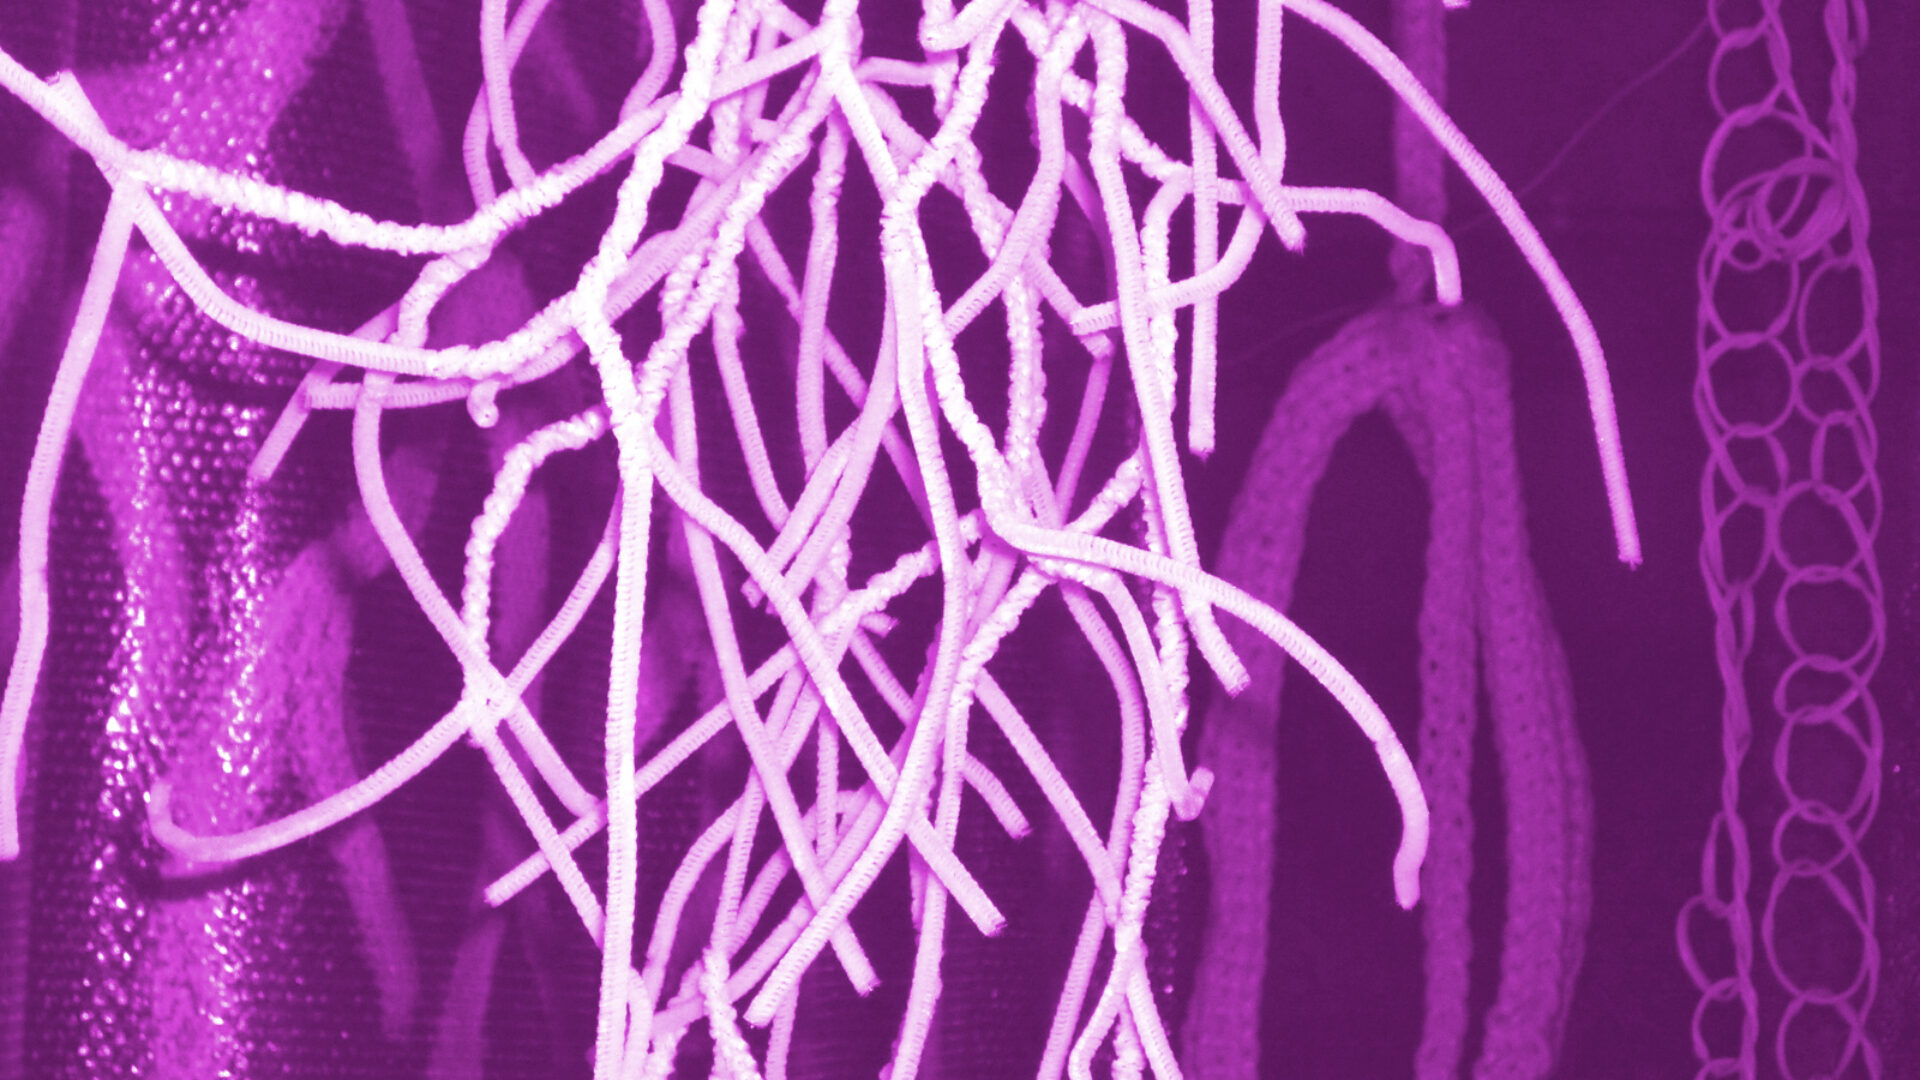 An image from Michal Teague showing work-in-progress from their exhibition work. A mycelial form in magenta.